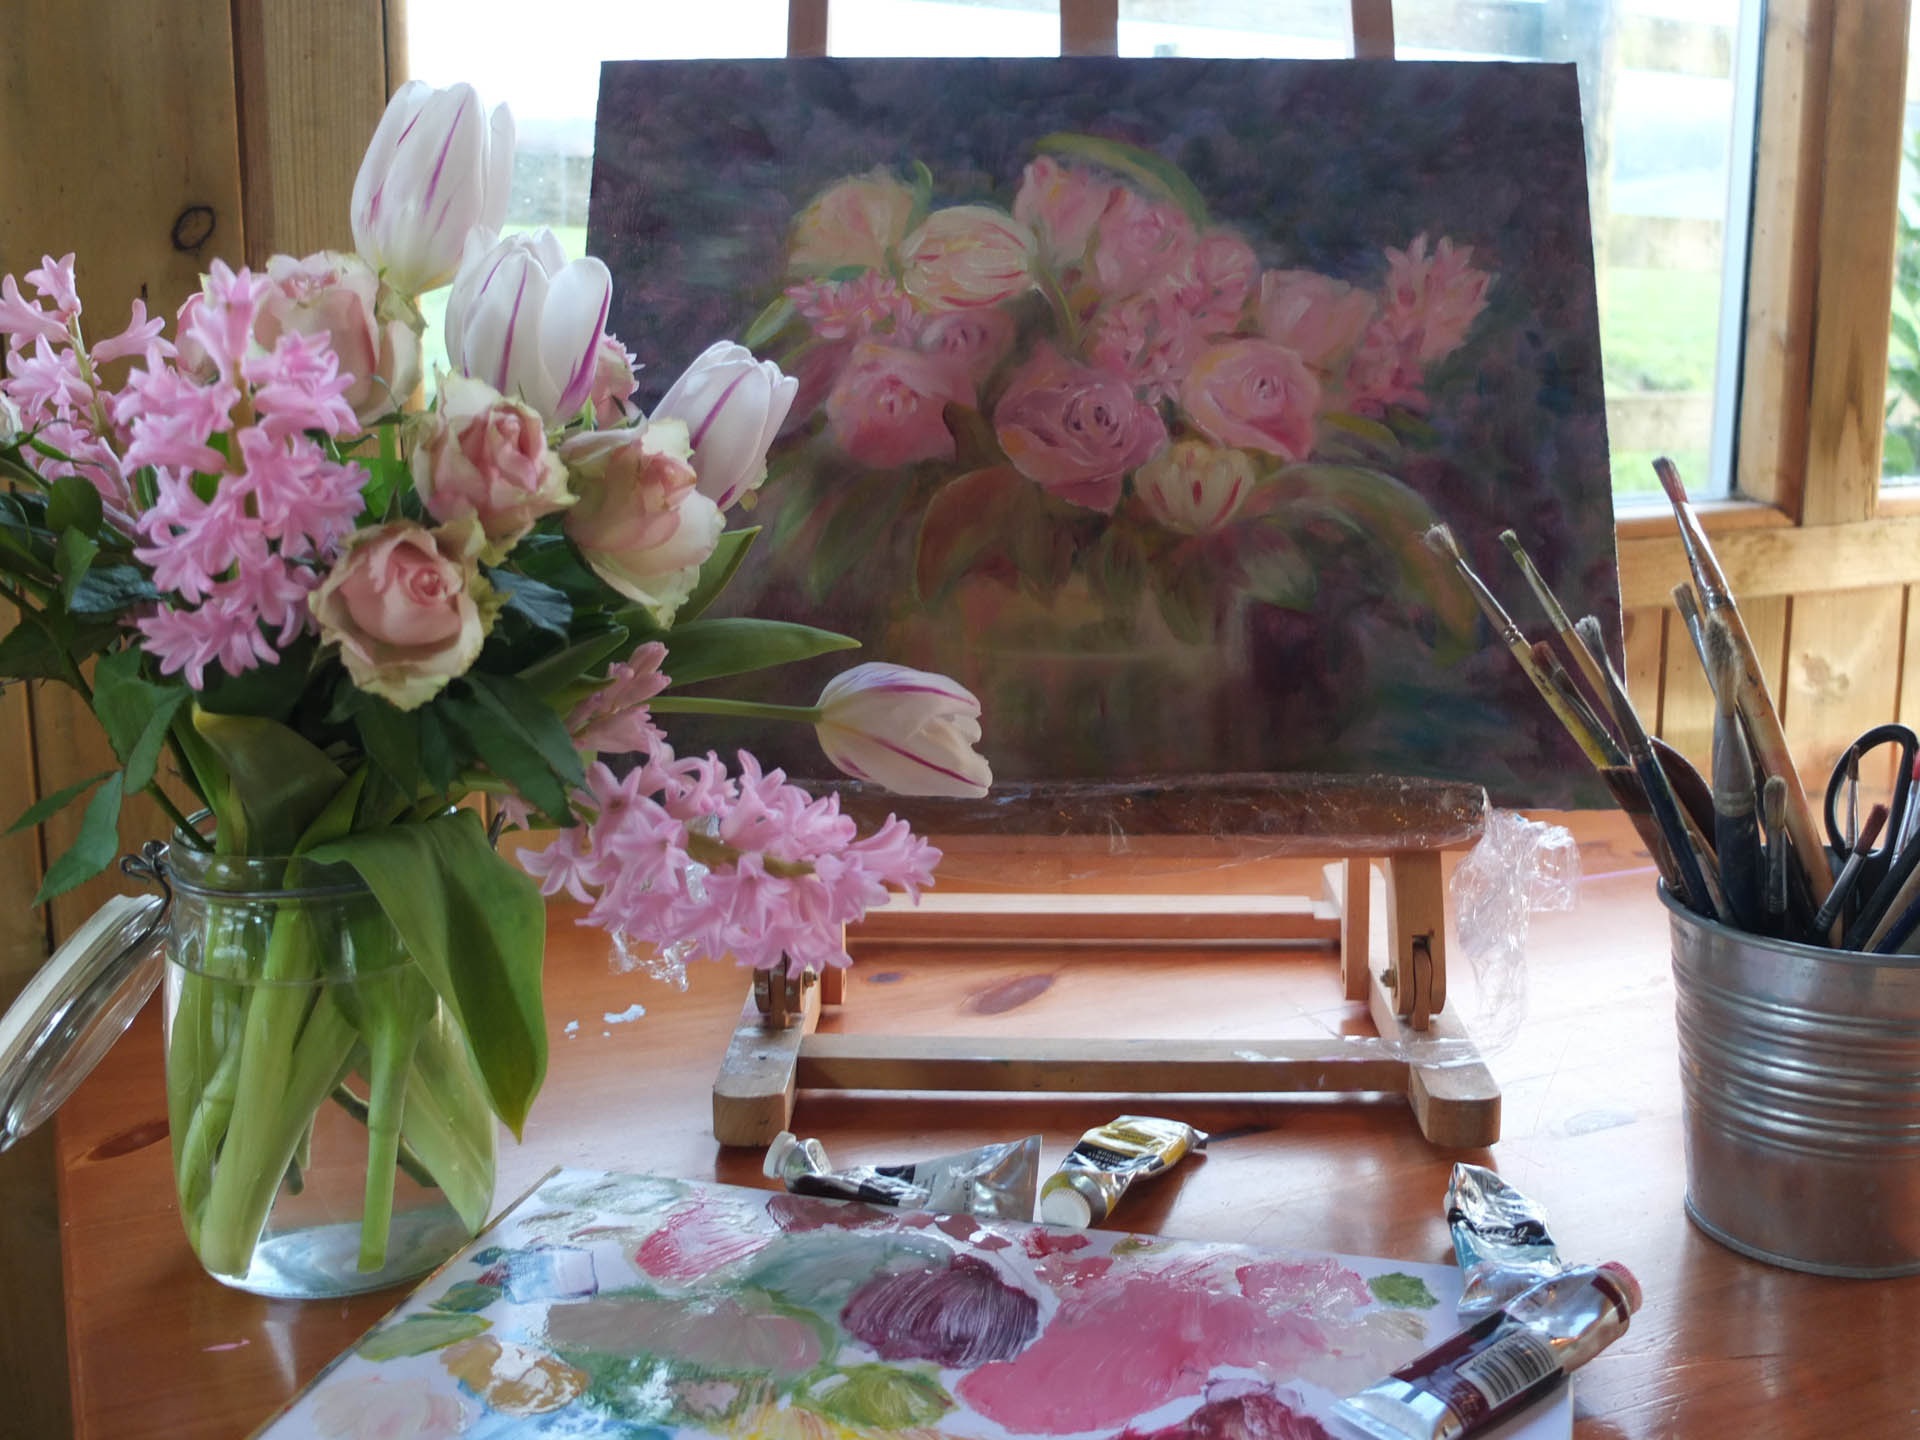 flowers next to a painting on flowers